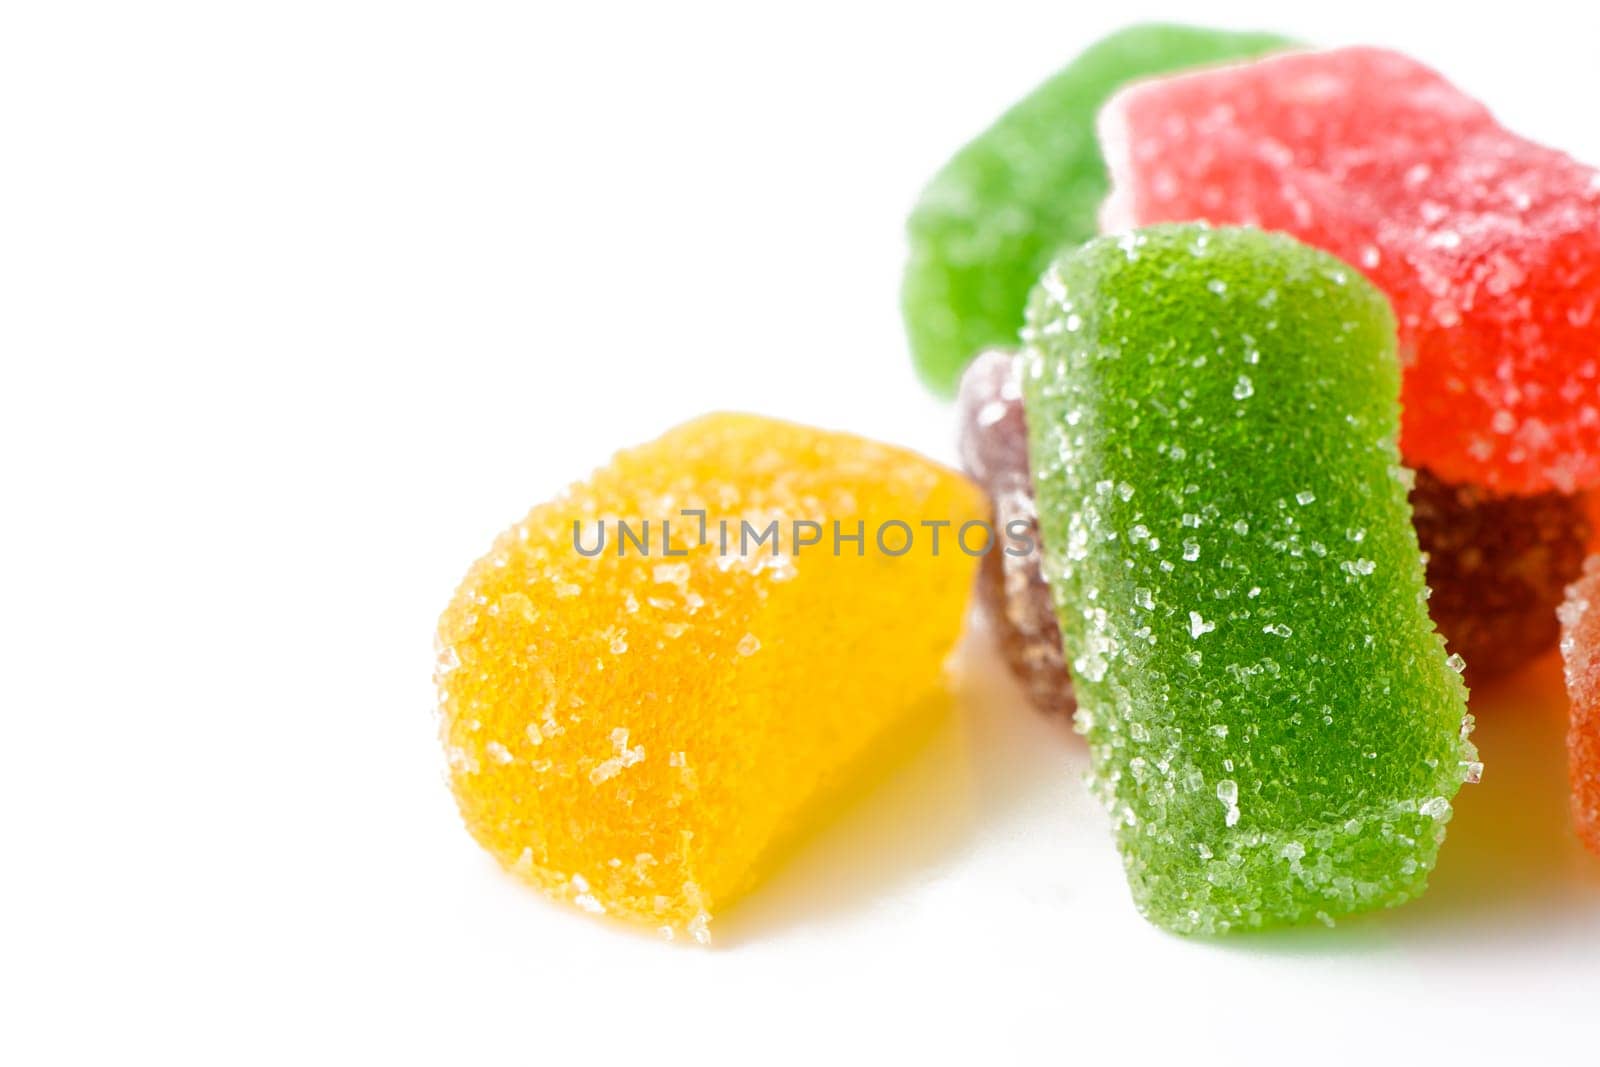 Multi-layered multicolored jelly marmalade of square shape. White background. Close-up by Mixa74